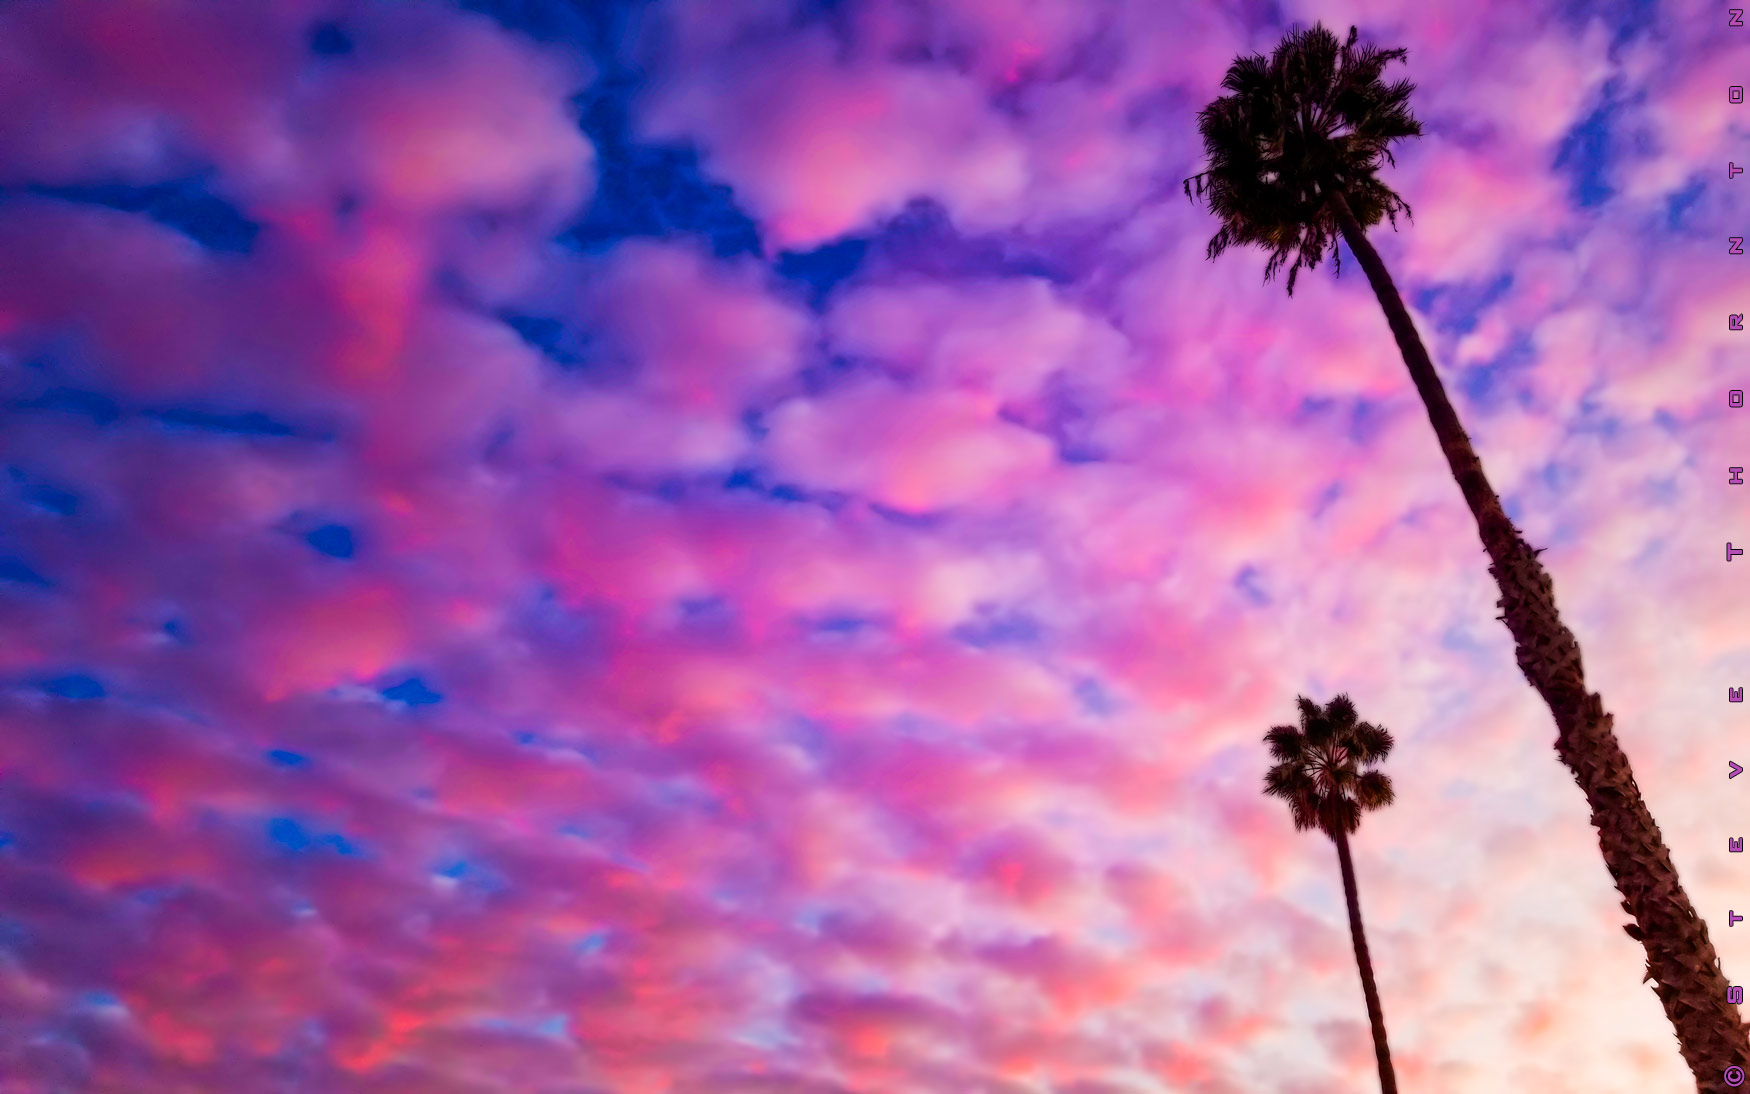 Puffy pink & blue clouds with palm trees shot in Marina del Rey at sunset